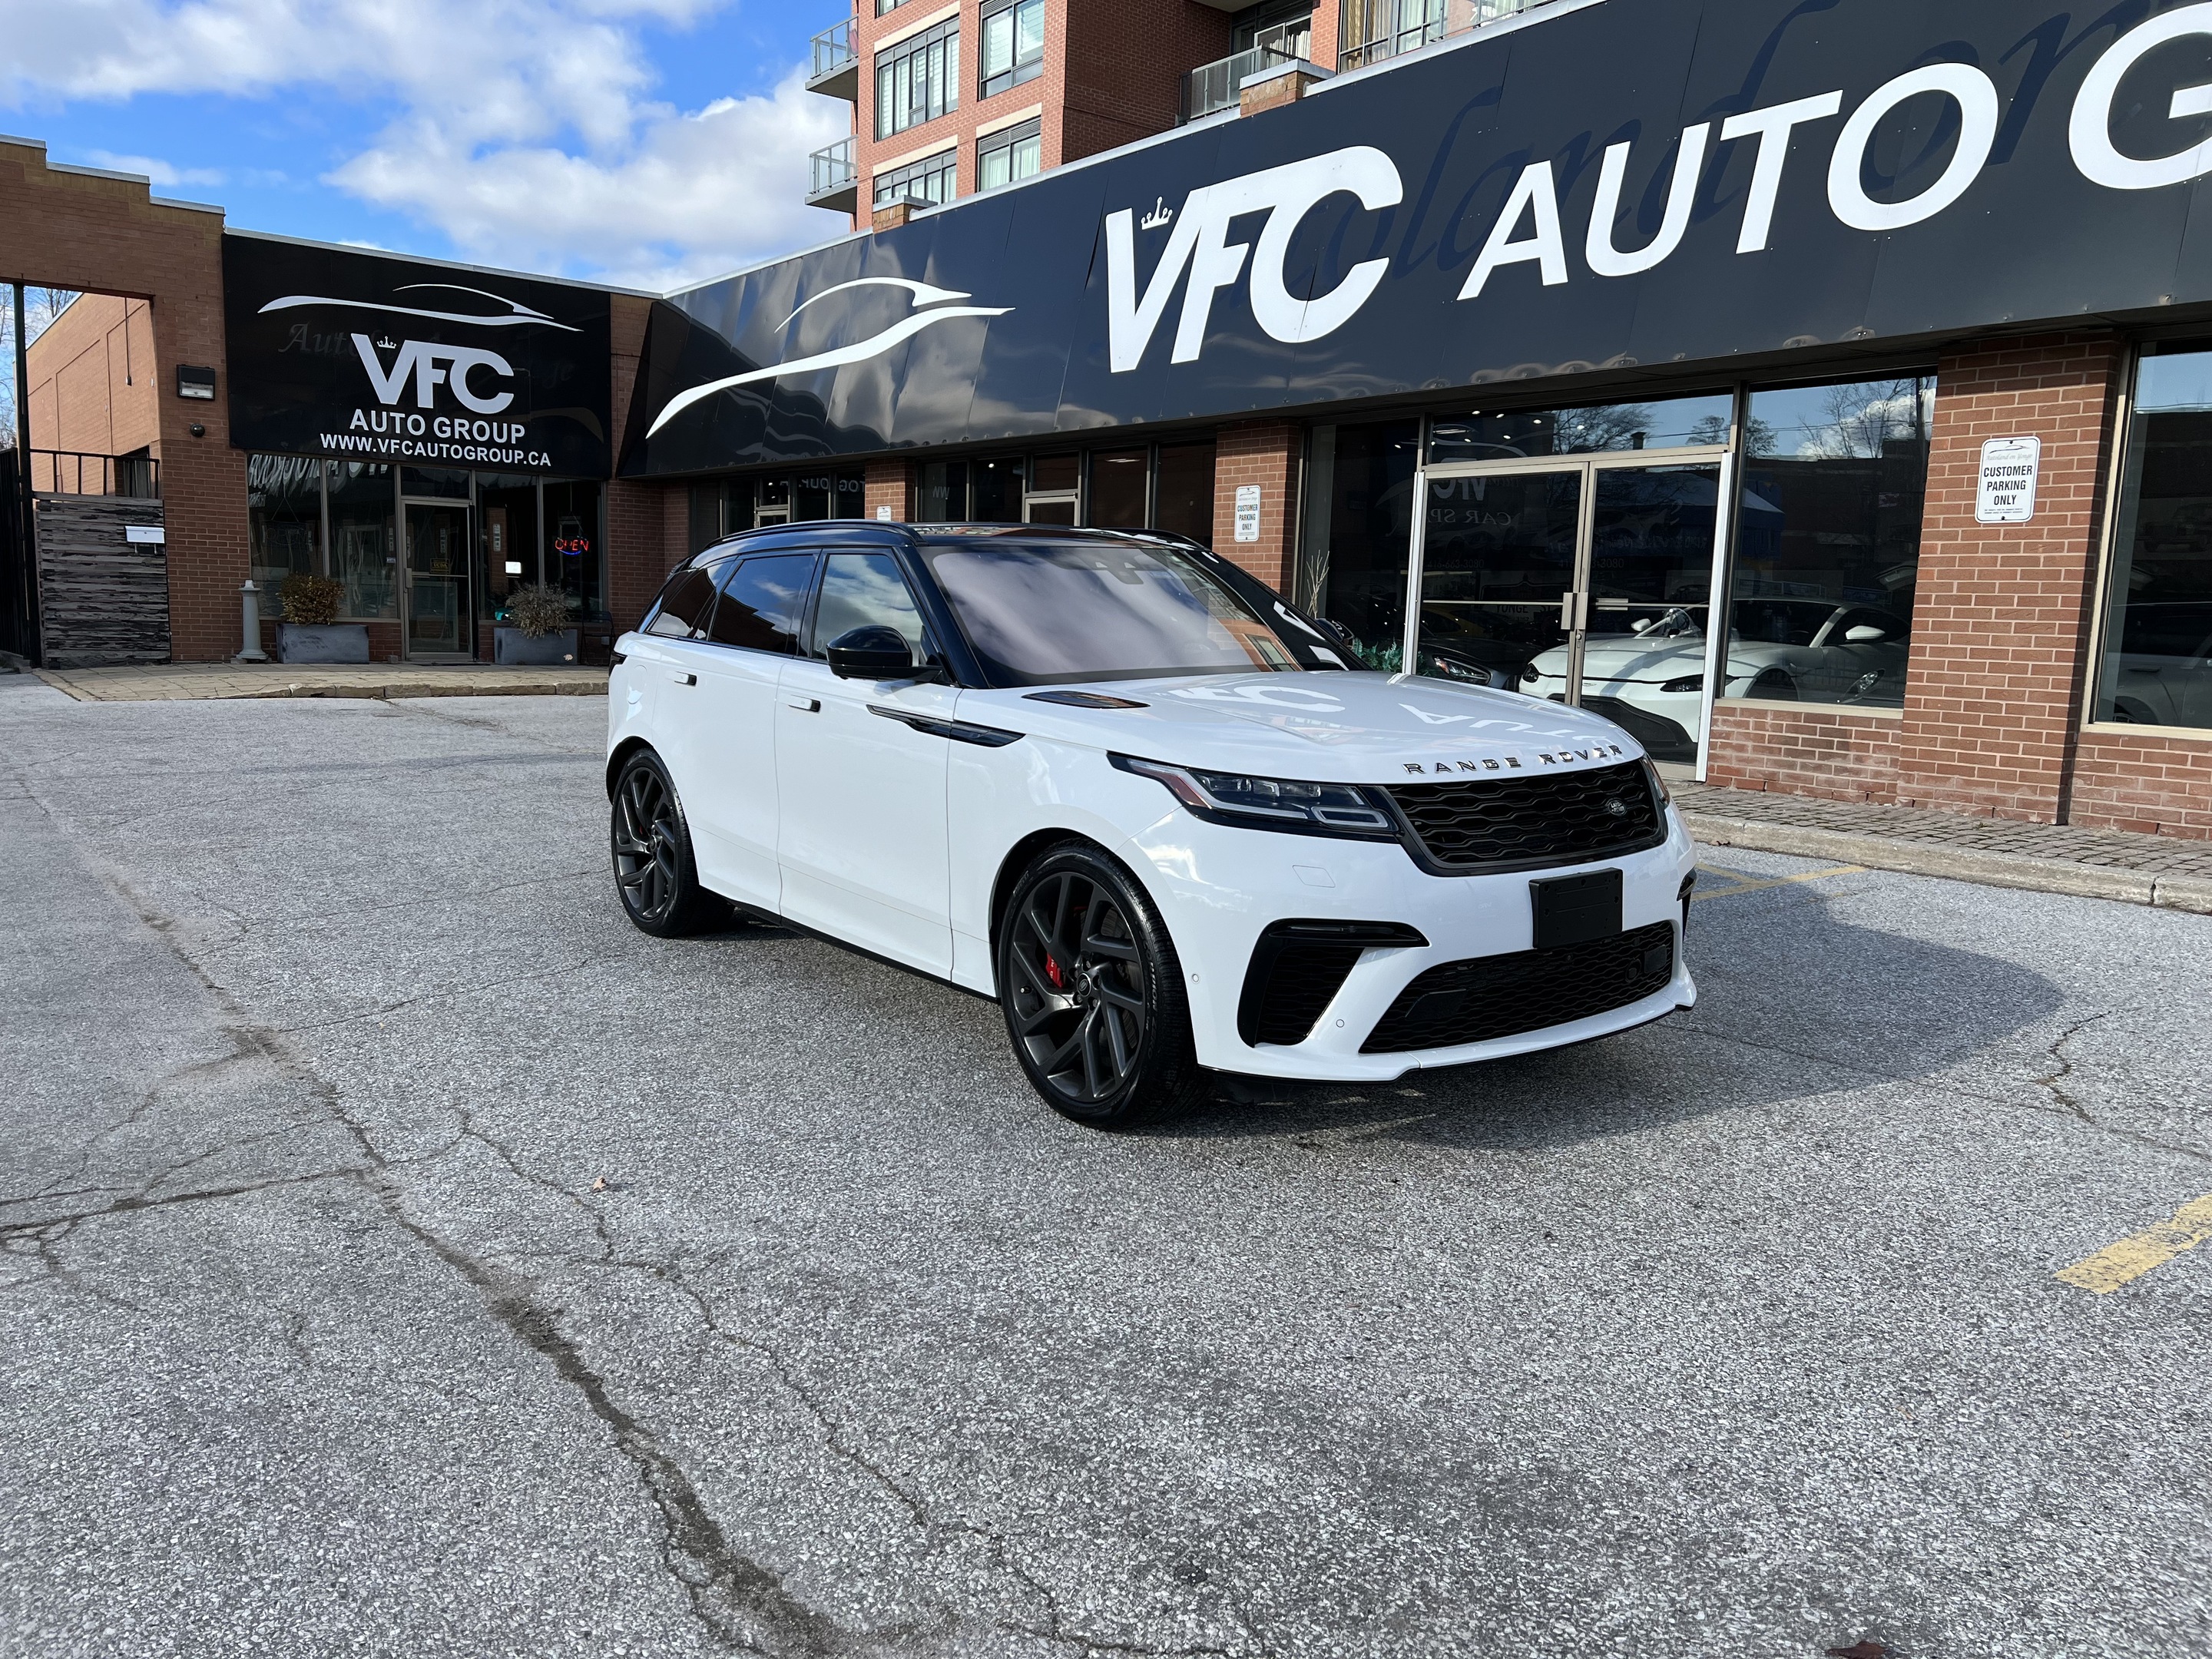 2020 Land Rover Range Rover Velar SV AUTOBIOGRAPHY! HIGHLY OPTIONED! ACCIDENT FREE!